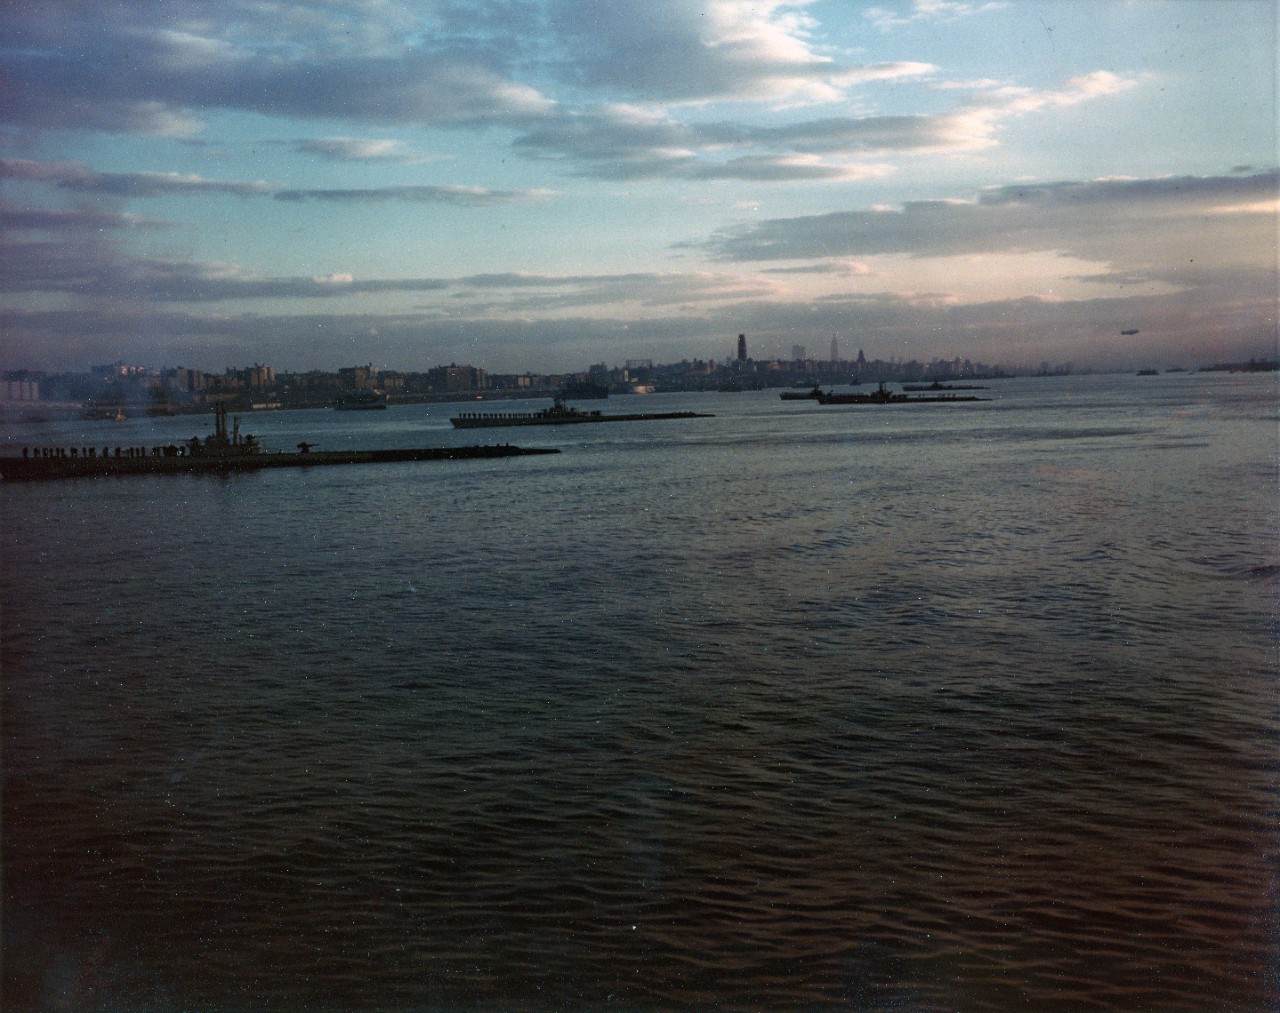 Submarines in the Hudson River, at sunset on Navy Day, just after President Truman steamed by them in USS Renshaw (DD-499). Sub at left is USS Crevalle (SS-291). Tenders in left and center background are USS Howard W. Gilmore (AS-16) and USS Orion (AS-18).